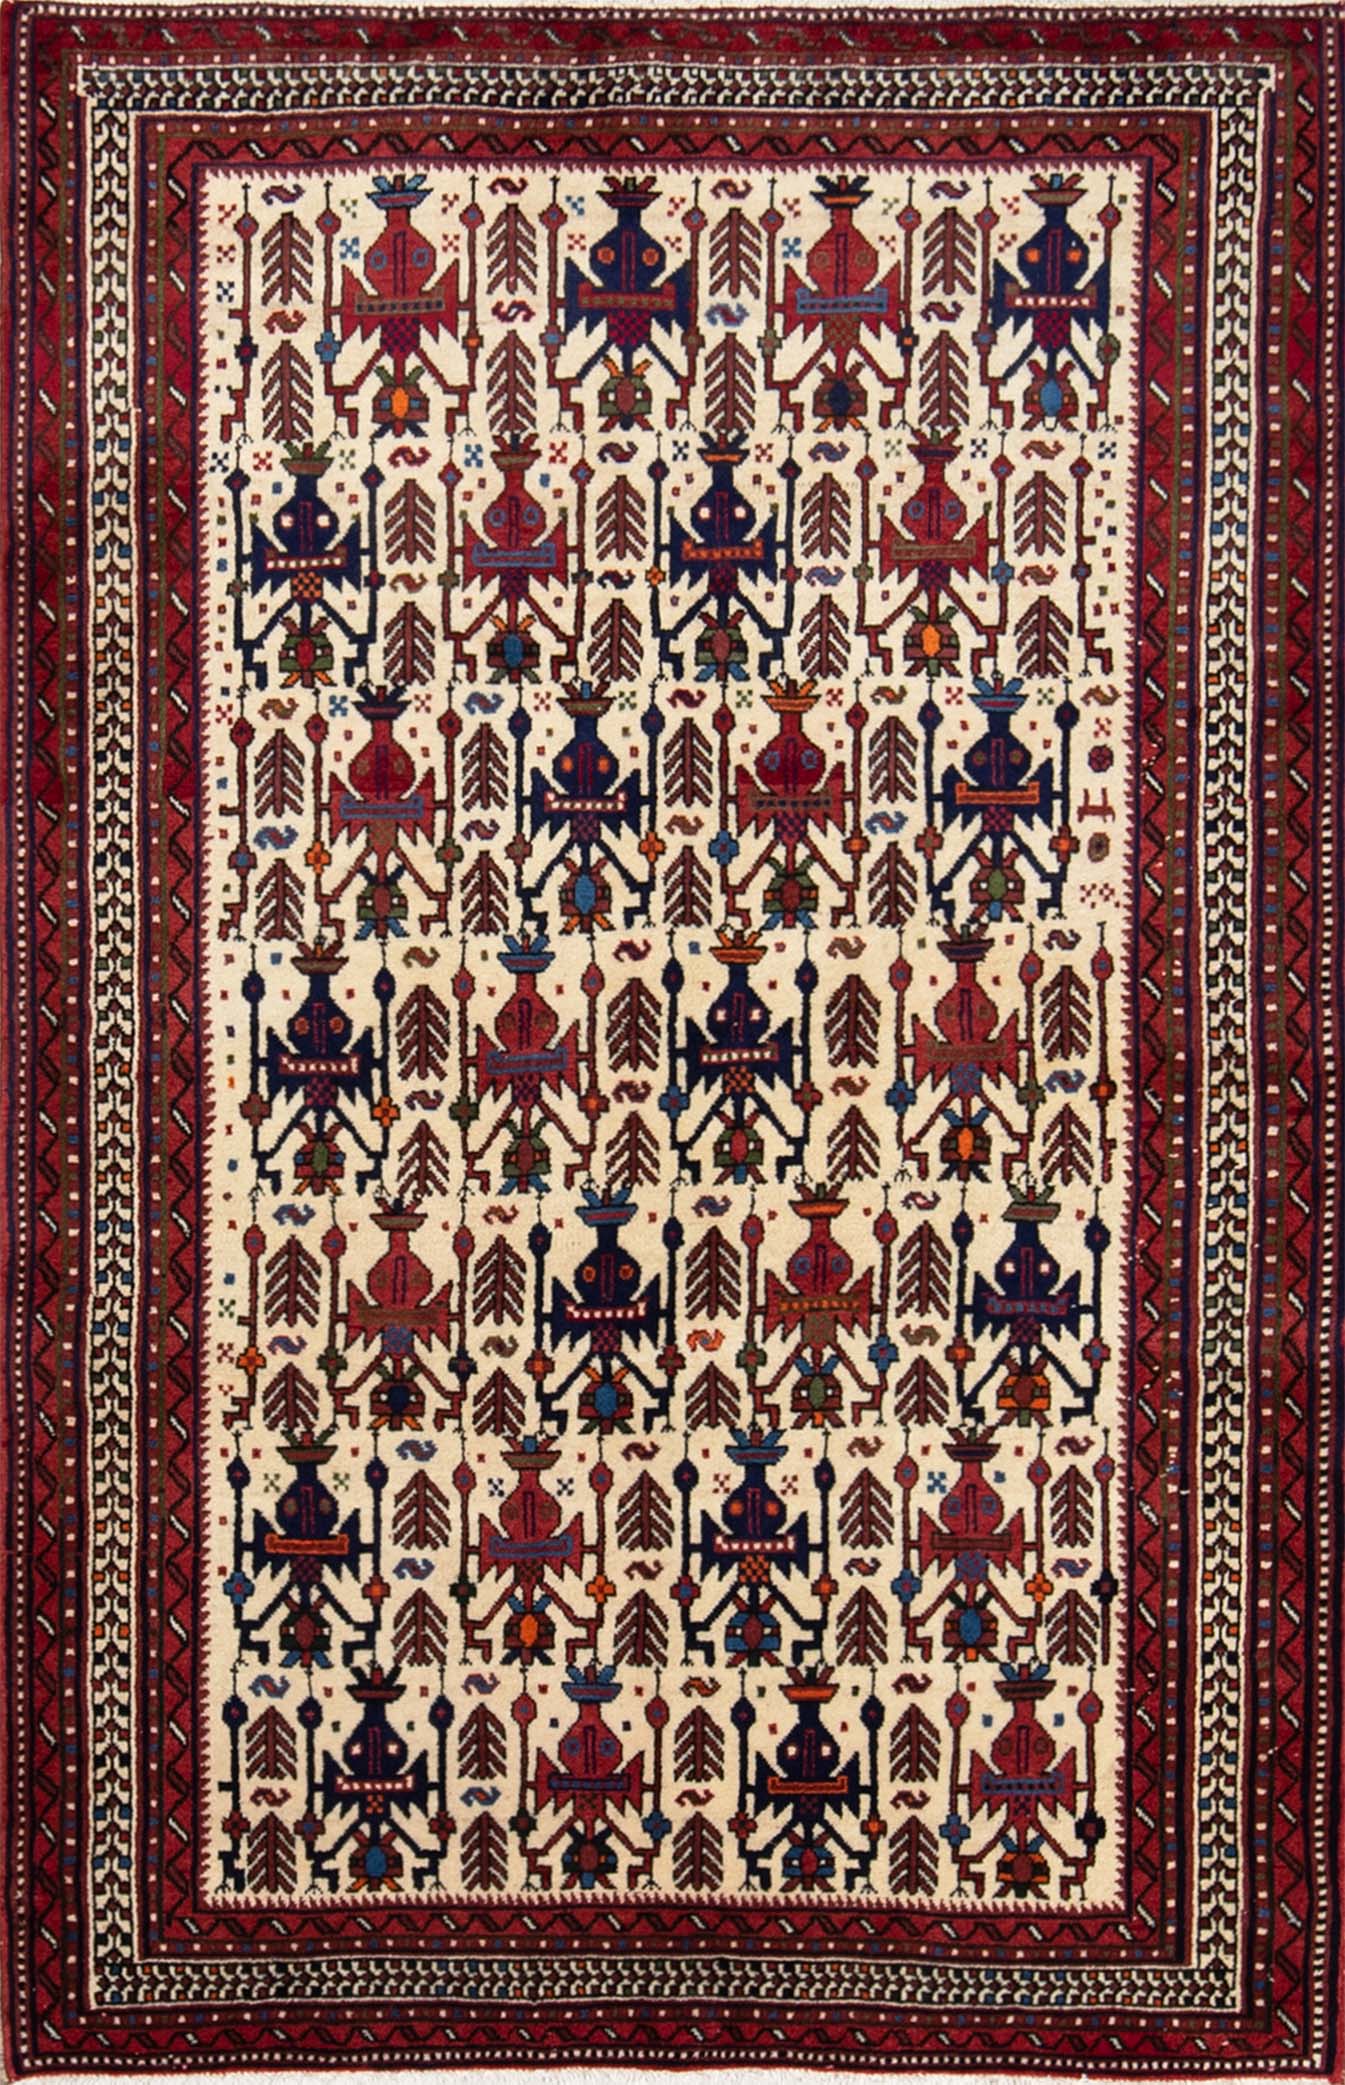 Tribal area rug. A handmade Persian Shiraz wool area rug in beige and red colors. Size 4.7x6.8.